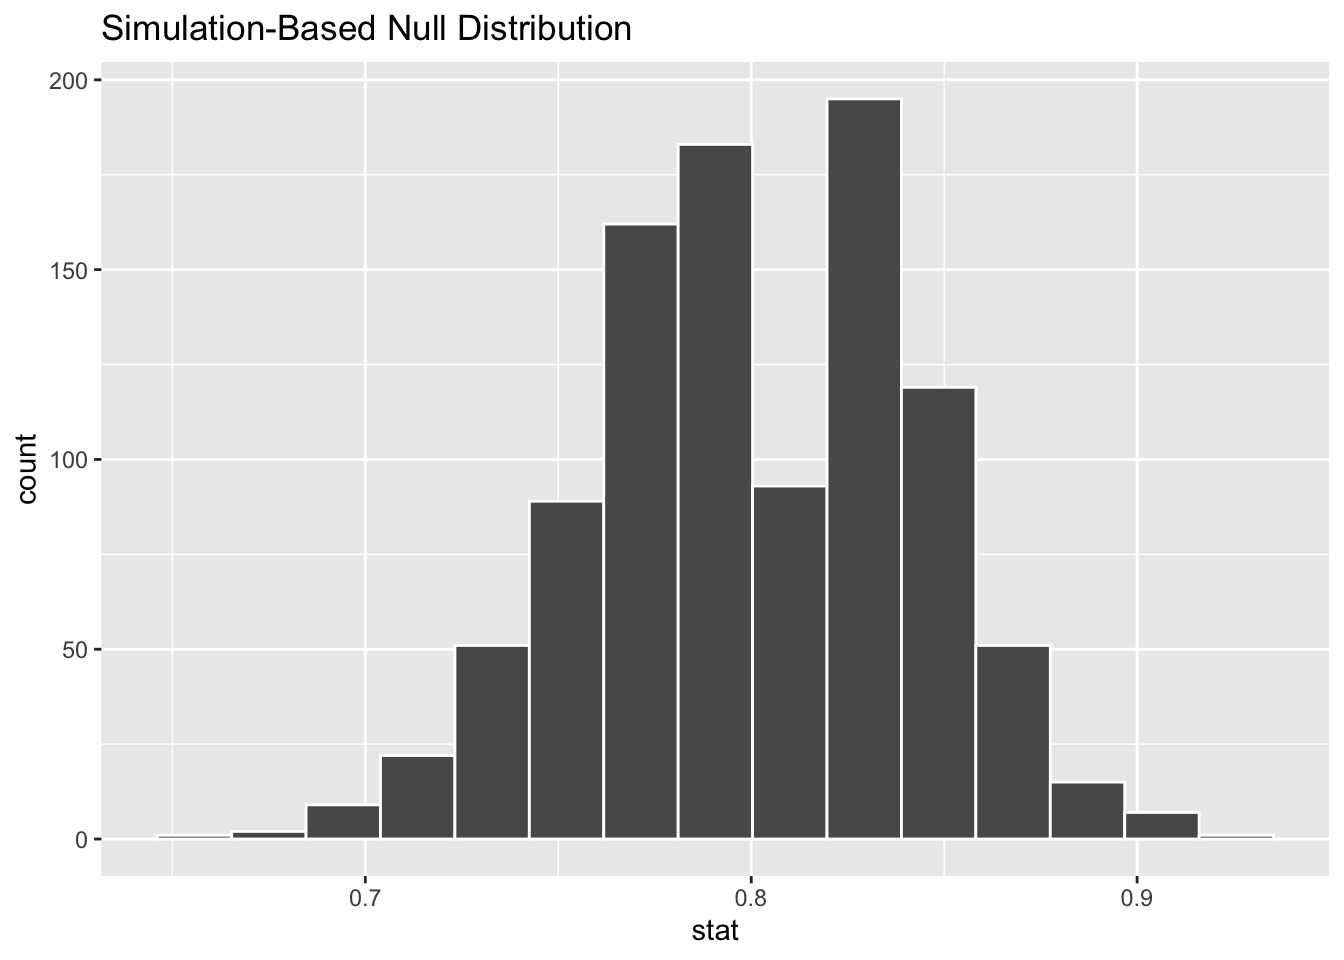 Null distribution for percentage of satisfied customers.